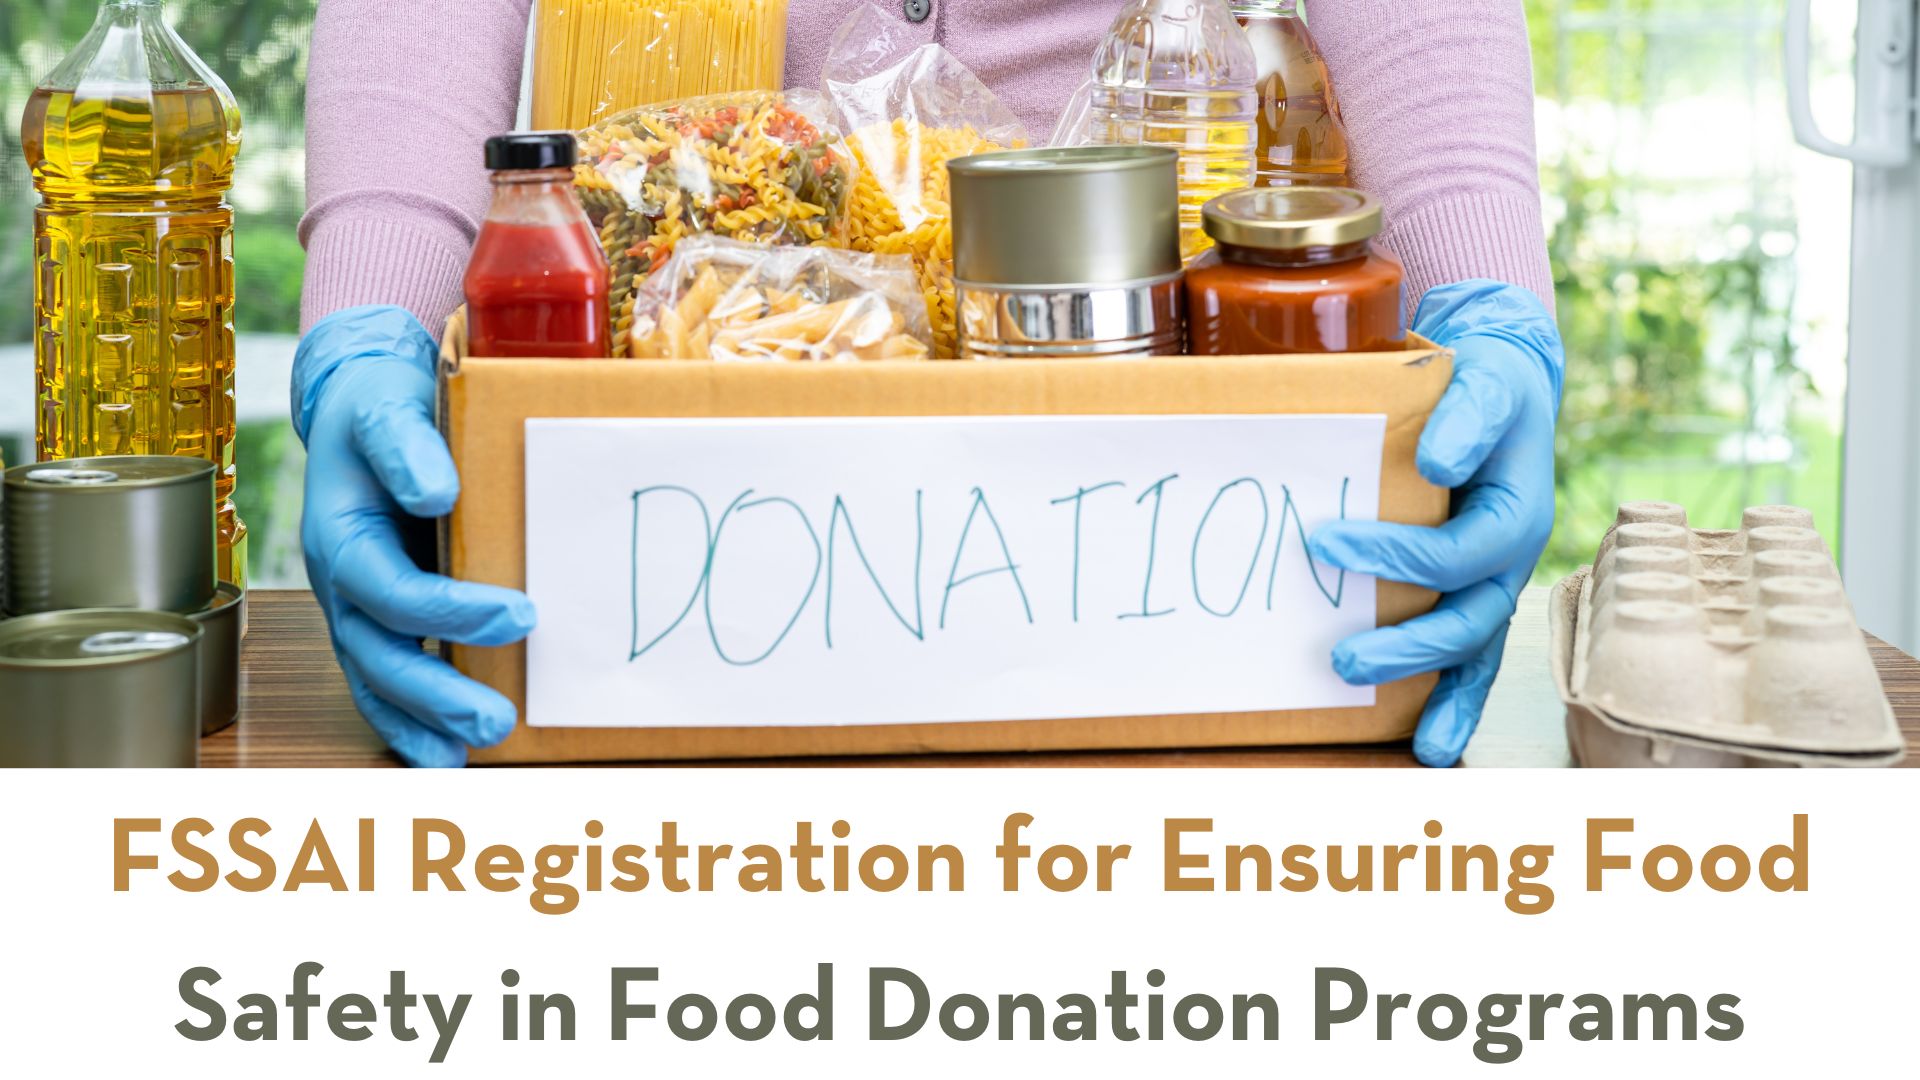 FSSAI Registration for Ensuring Food Safety in Food Donation Programs